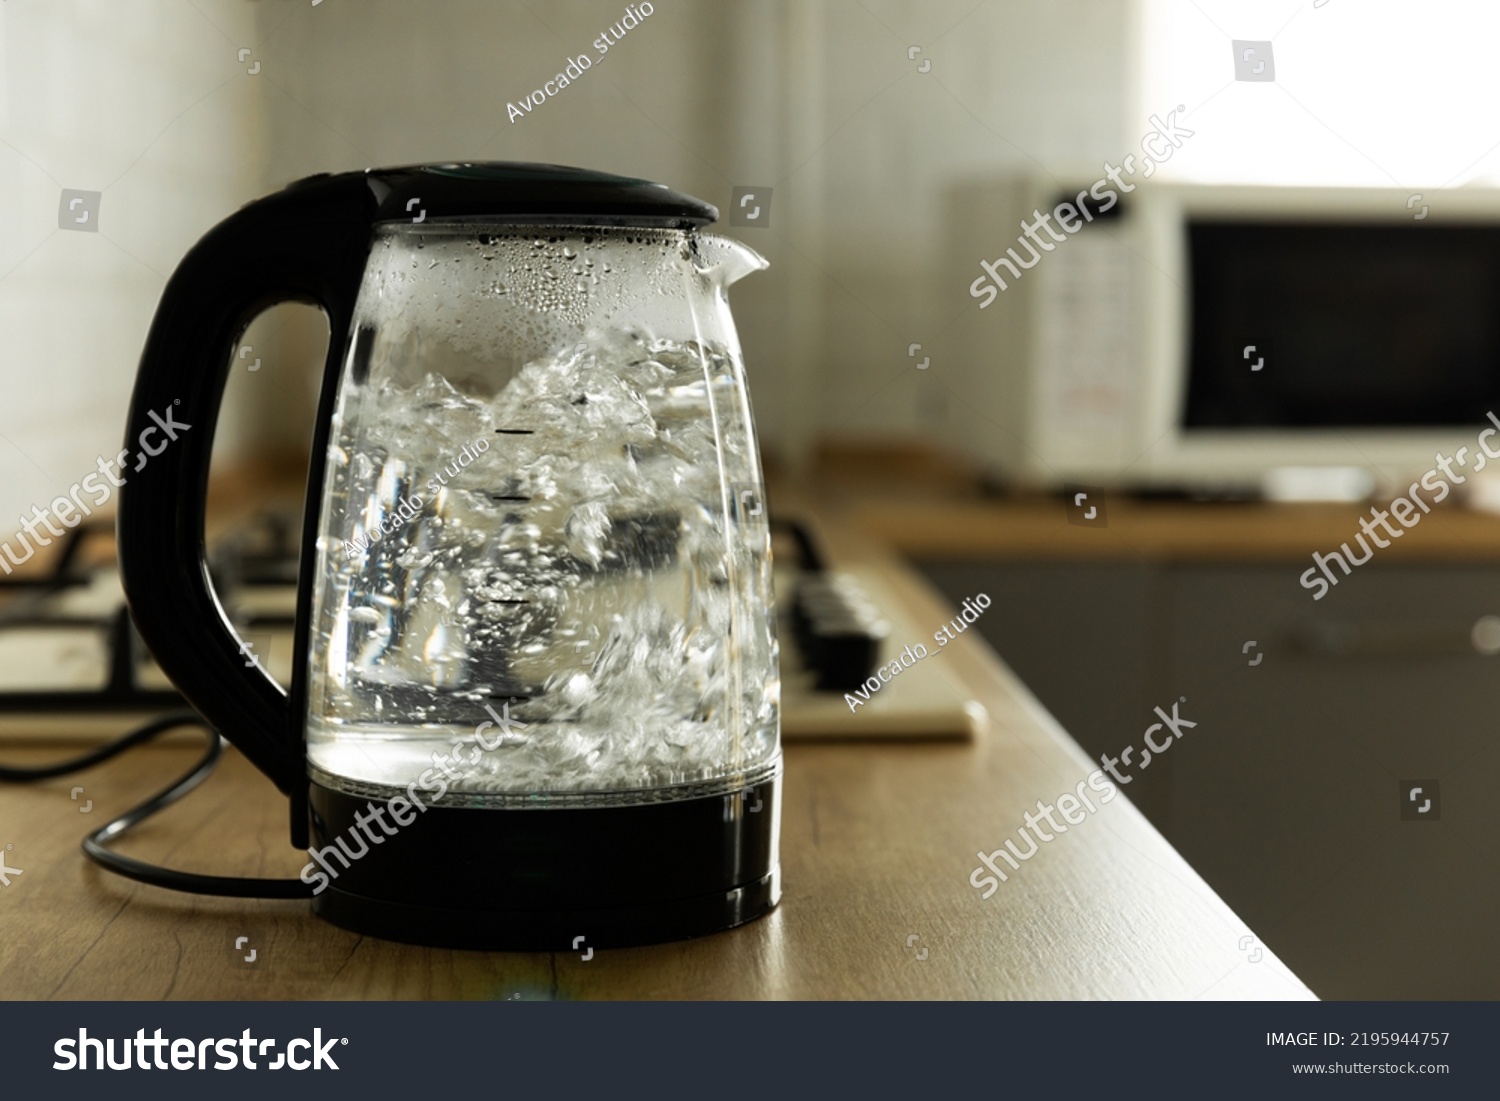 Modern electric transparent kettle on a wooden table in the kitchen.Kettle for boiling water and making tea.Home appliances for making hot drinks.Space for copy.Place for text. #2195944757